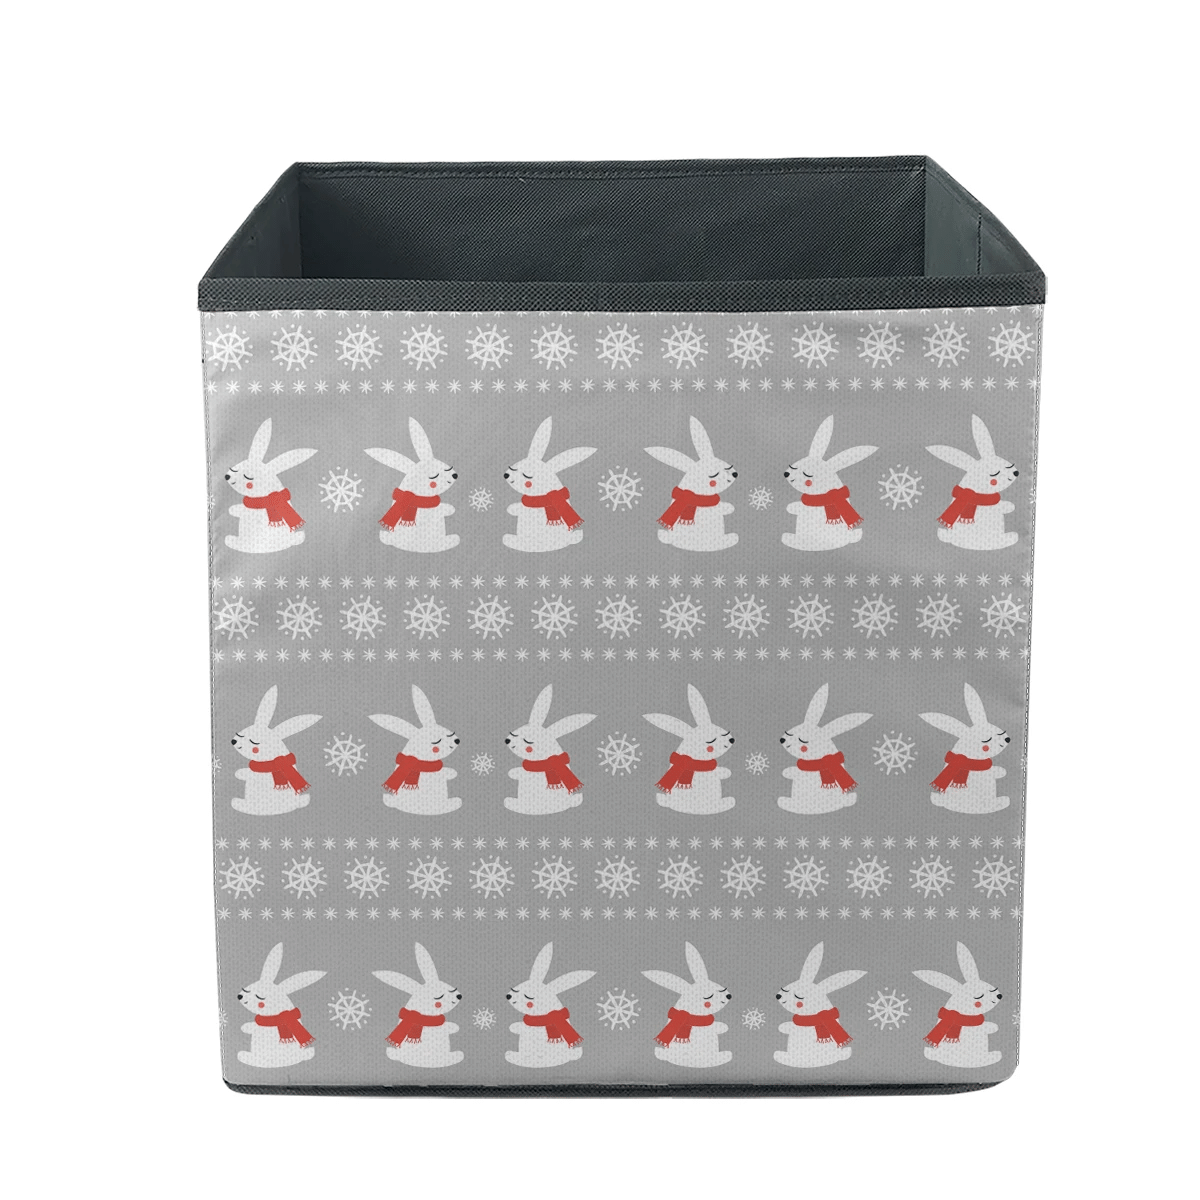 Cute Baby Rabbits Red Scarf With Snowflakes Pattern On Gray Background Storage Bin Storage Cube